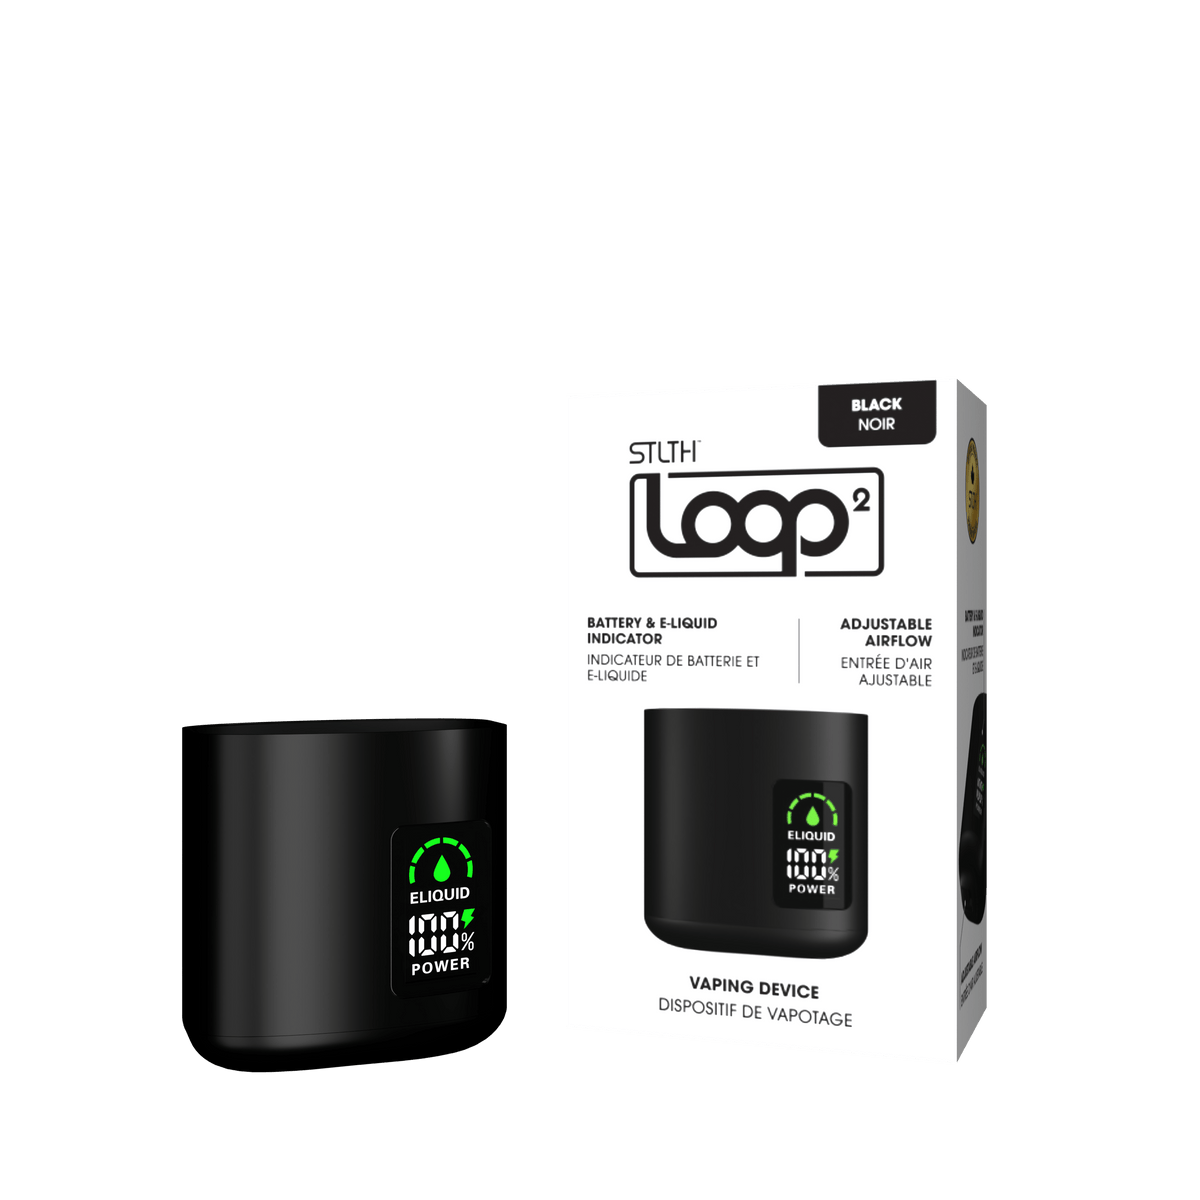 STLTH Loop 2 Closed Pod Device available on Canada online vape shop